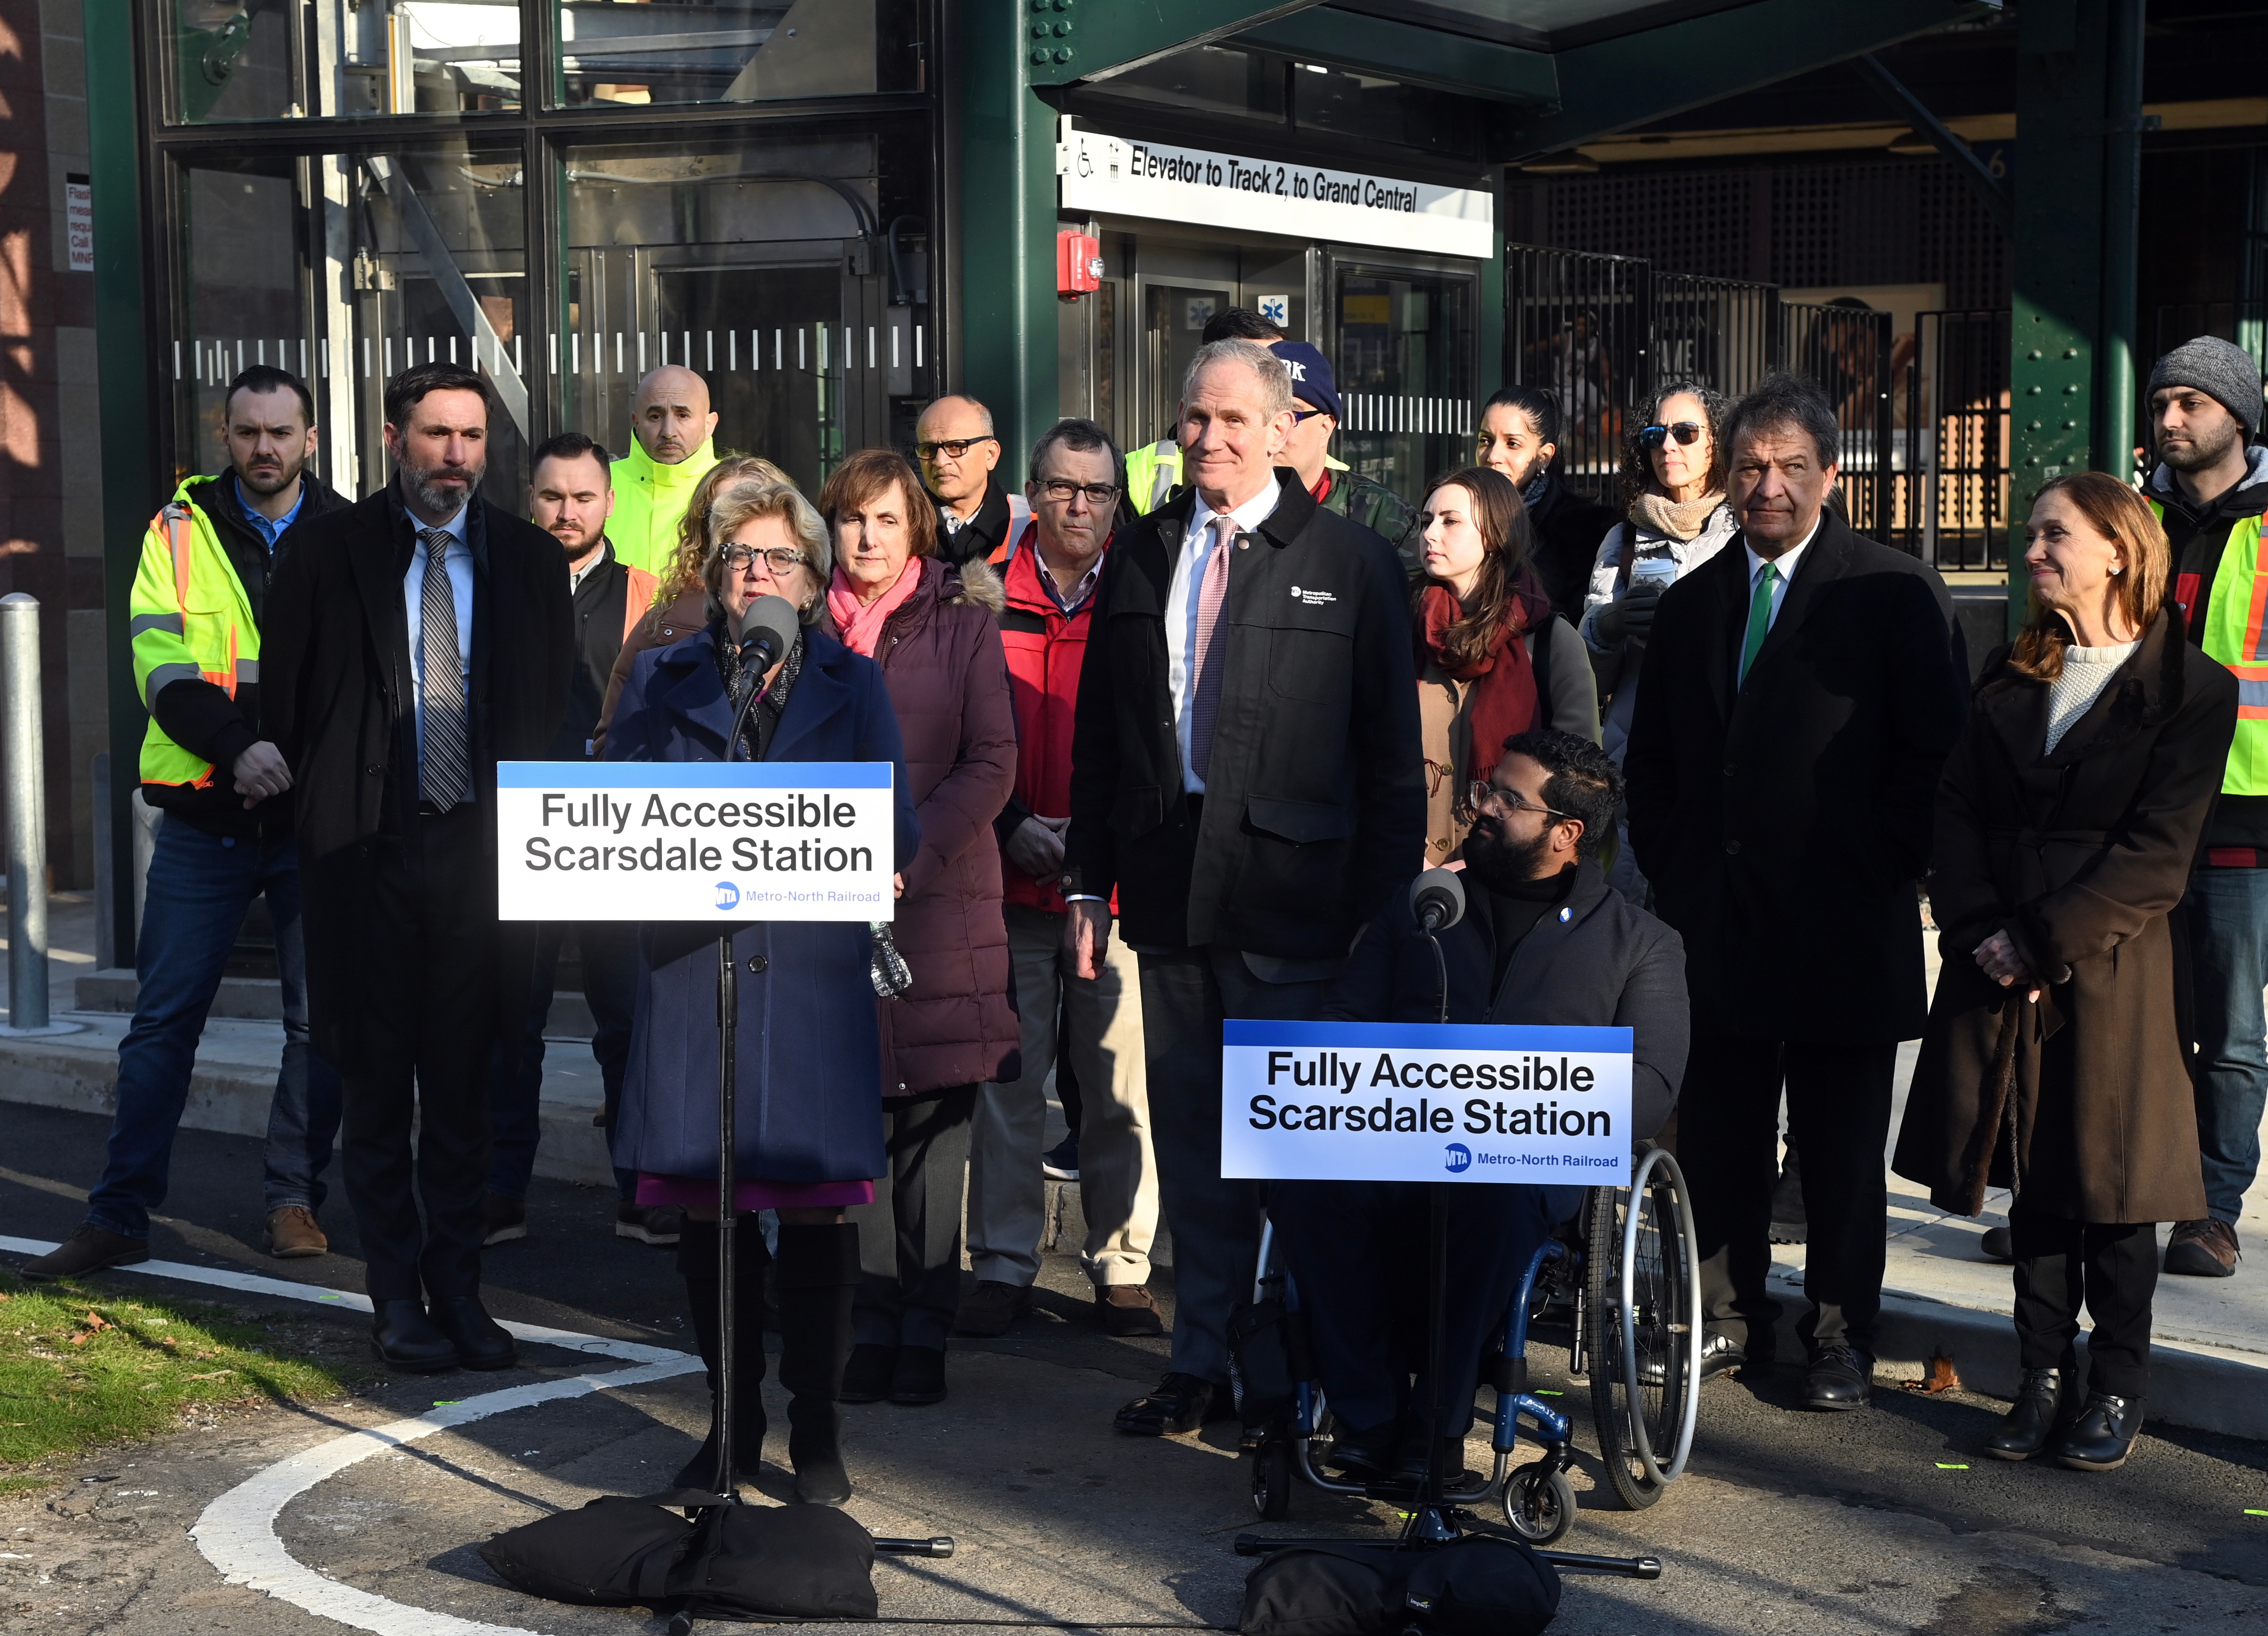 Scarsdale Station Becomes Second Metro-North Station to Be Made Fully Accessible This Year